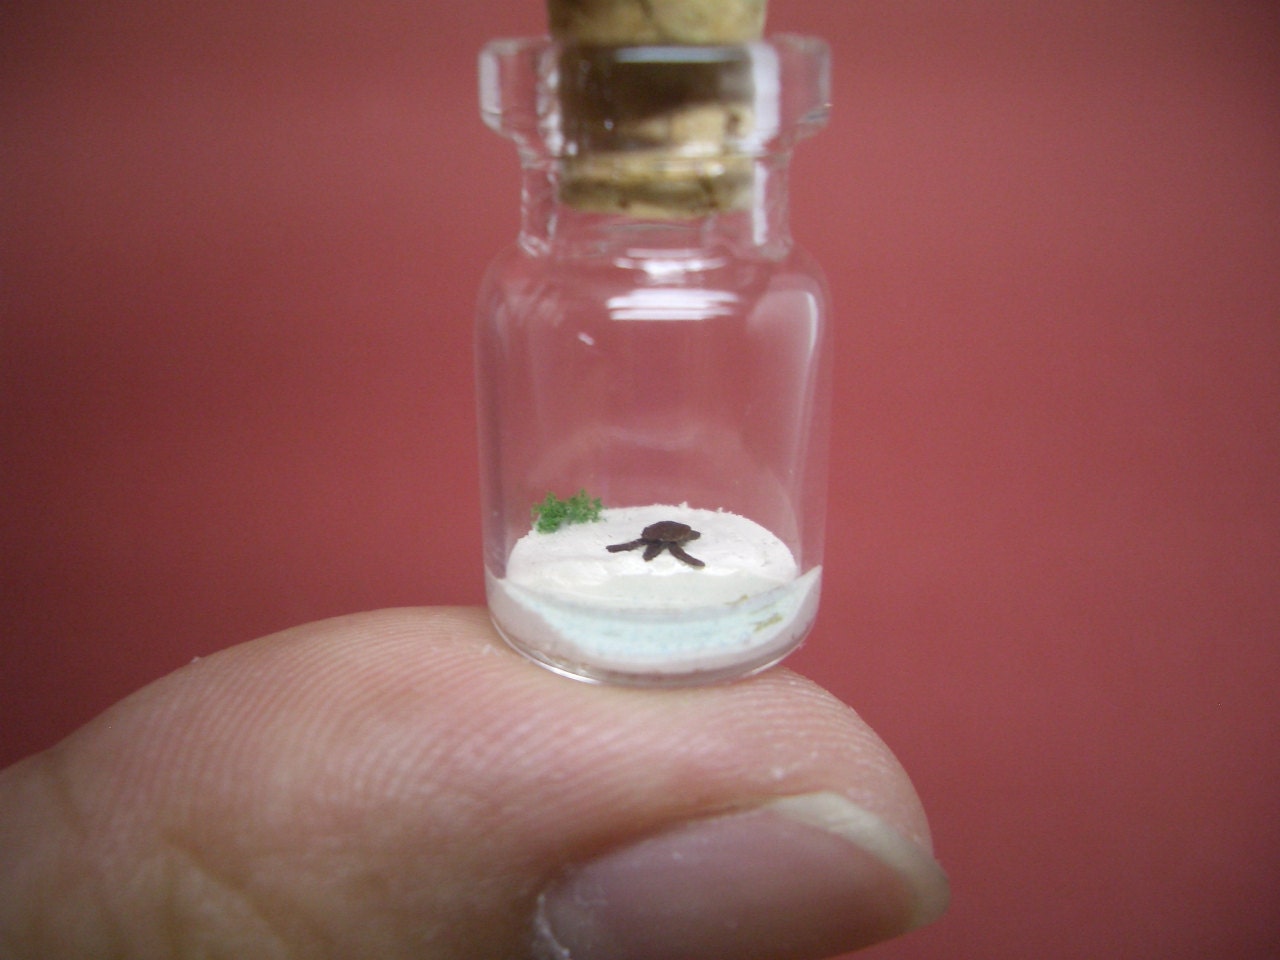 First hatched sea turtles reaches the ocean in a tiny bottle